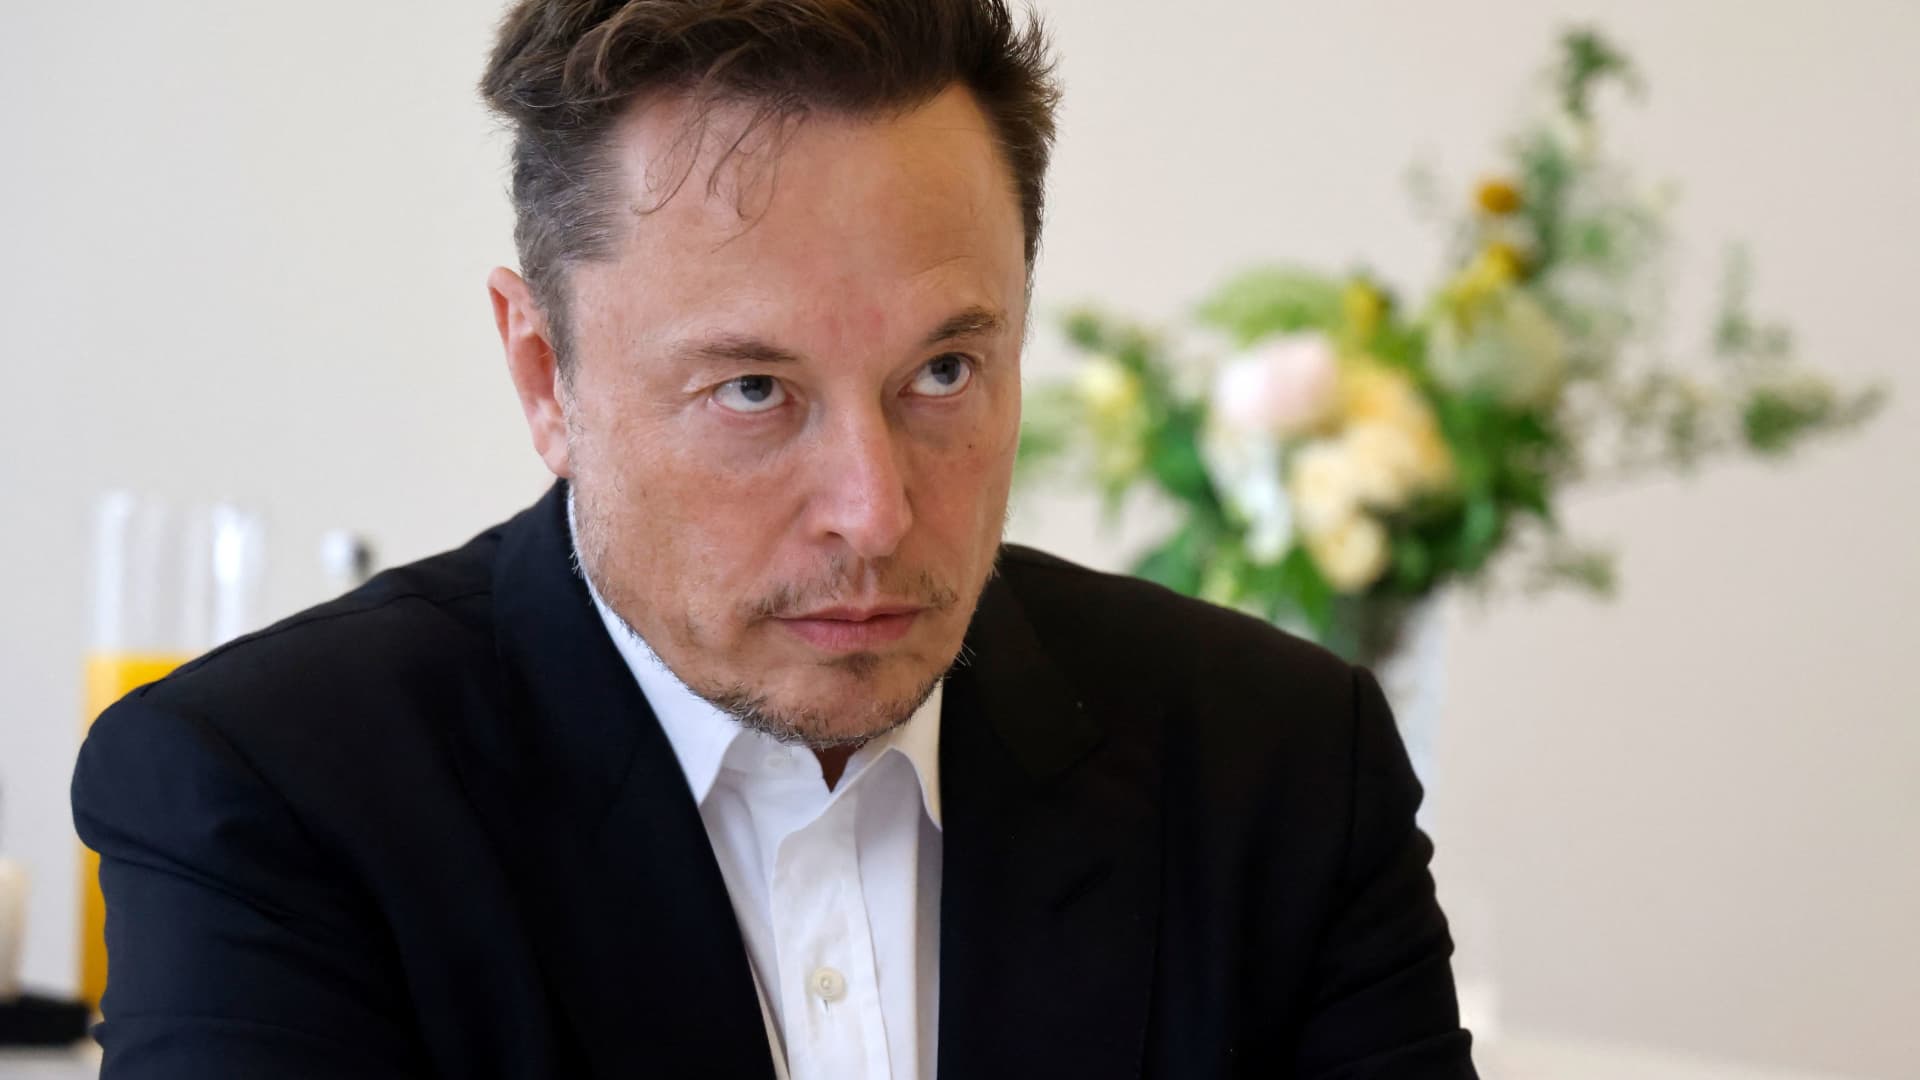 elon-musk:-‘i’ll-say-what-i-want,-and-if-the-consequence-of-that-is-losing-money,-so-be-it’